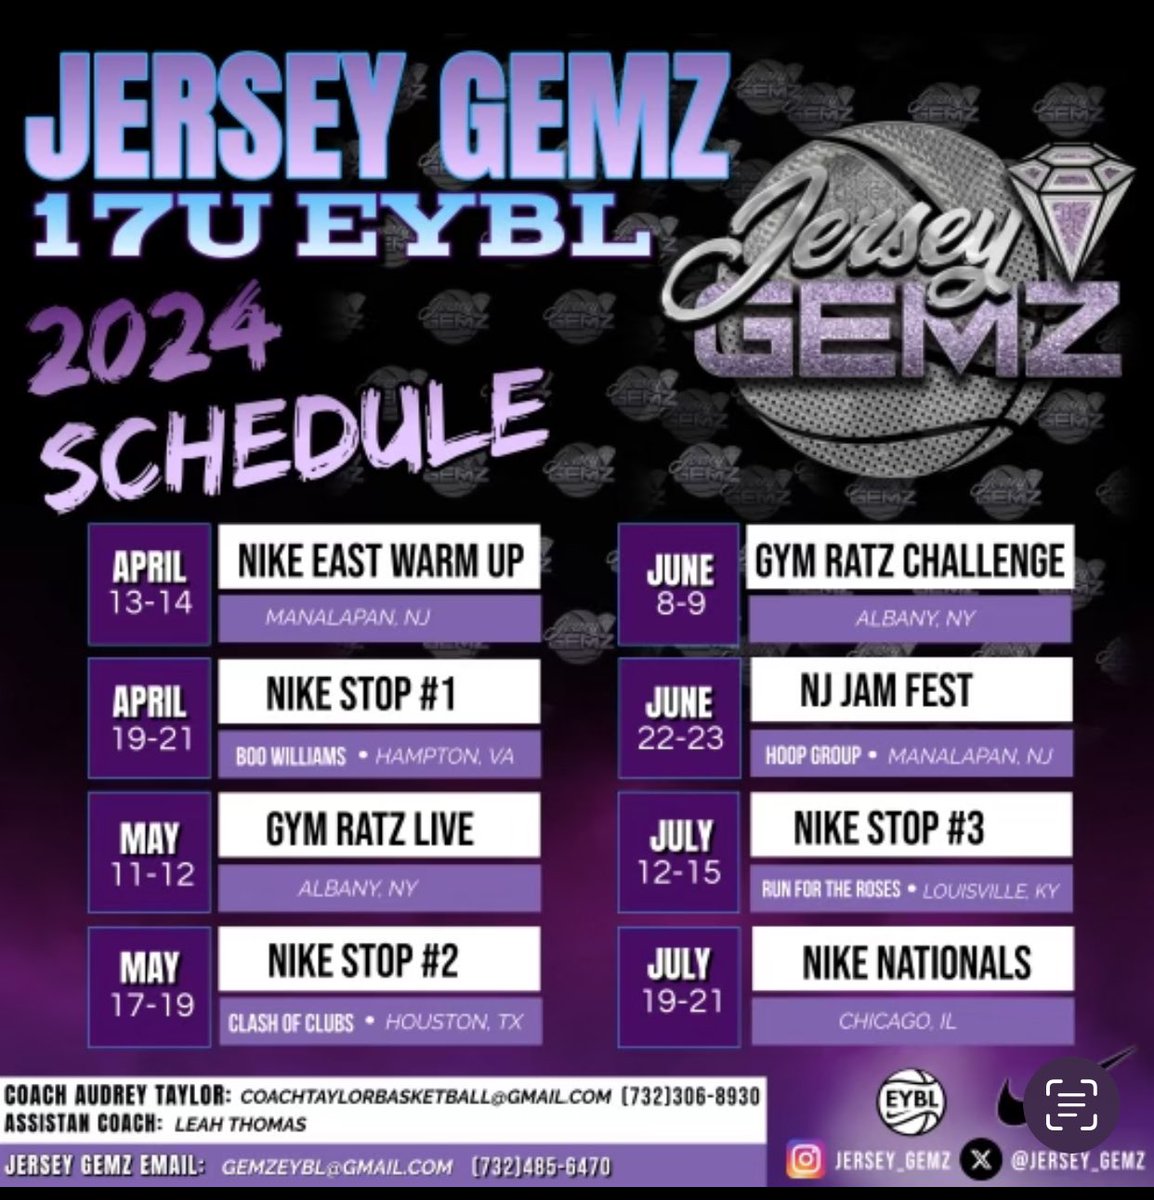 This is my schedule come check us out!!! Let’s goooo